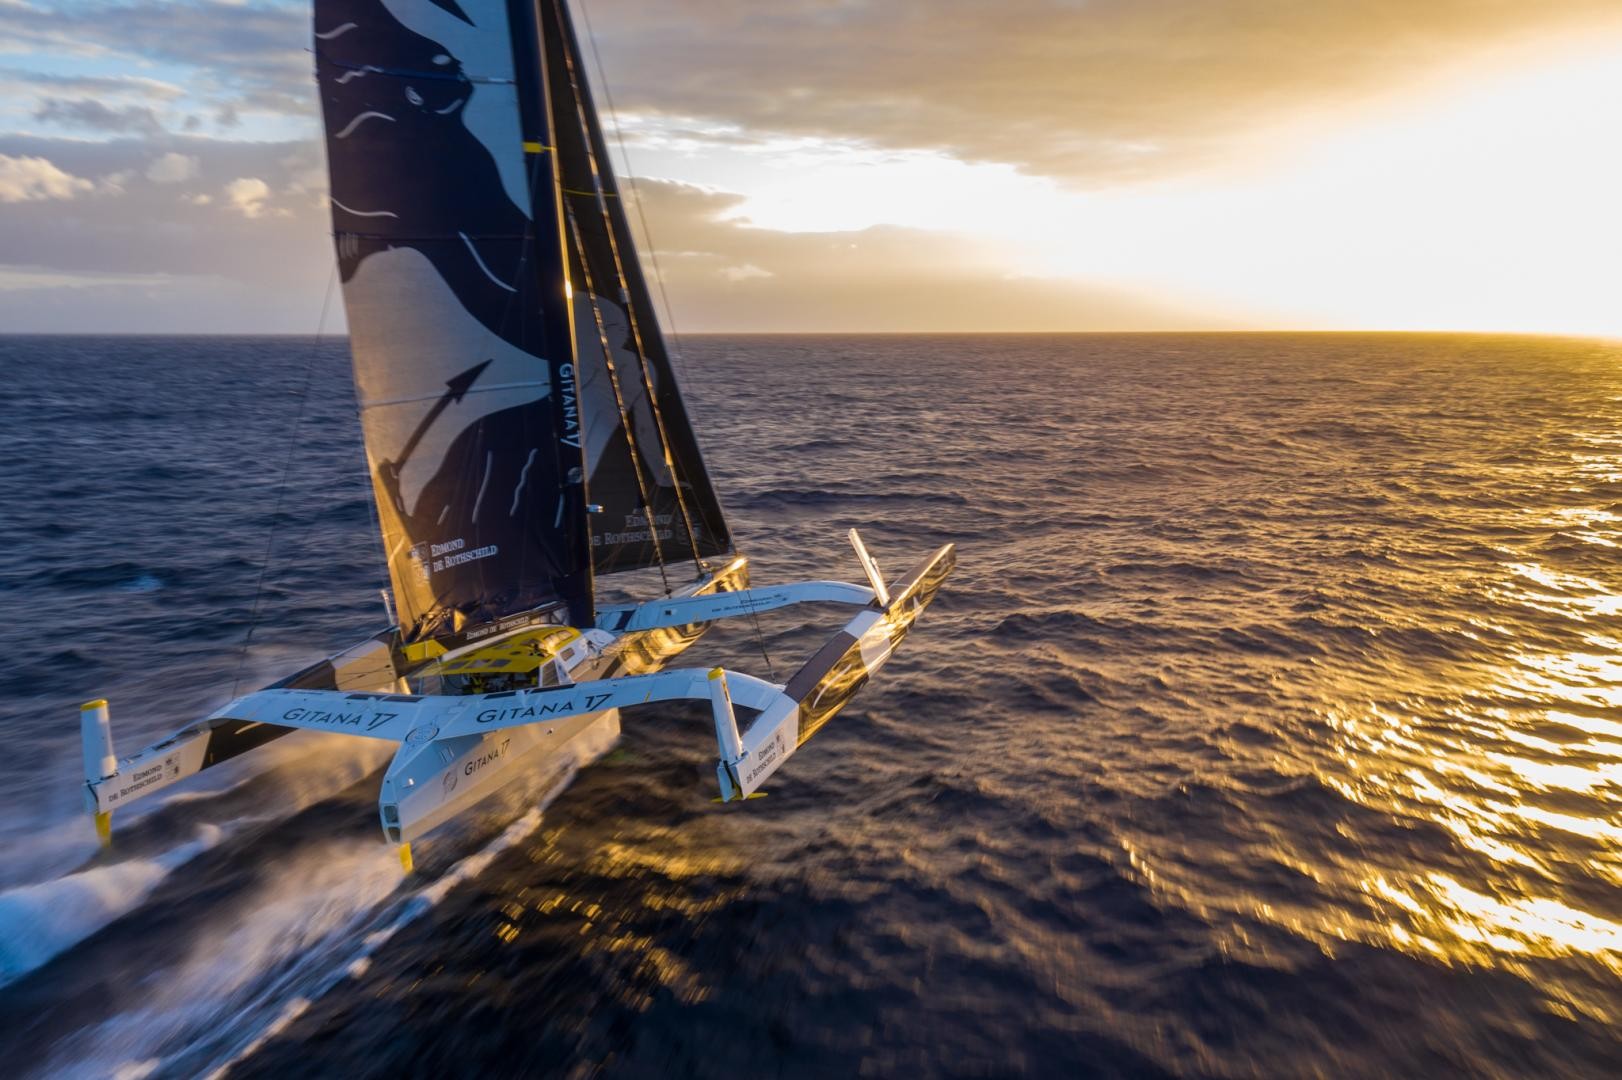 DIY and doldrums in prospect for the Maxi Edmond de Rothschild